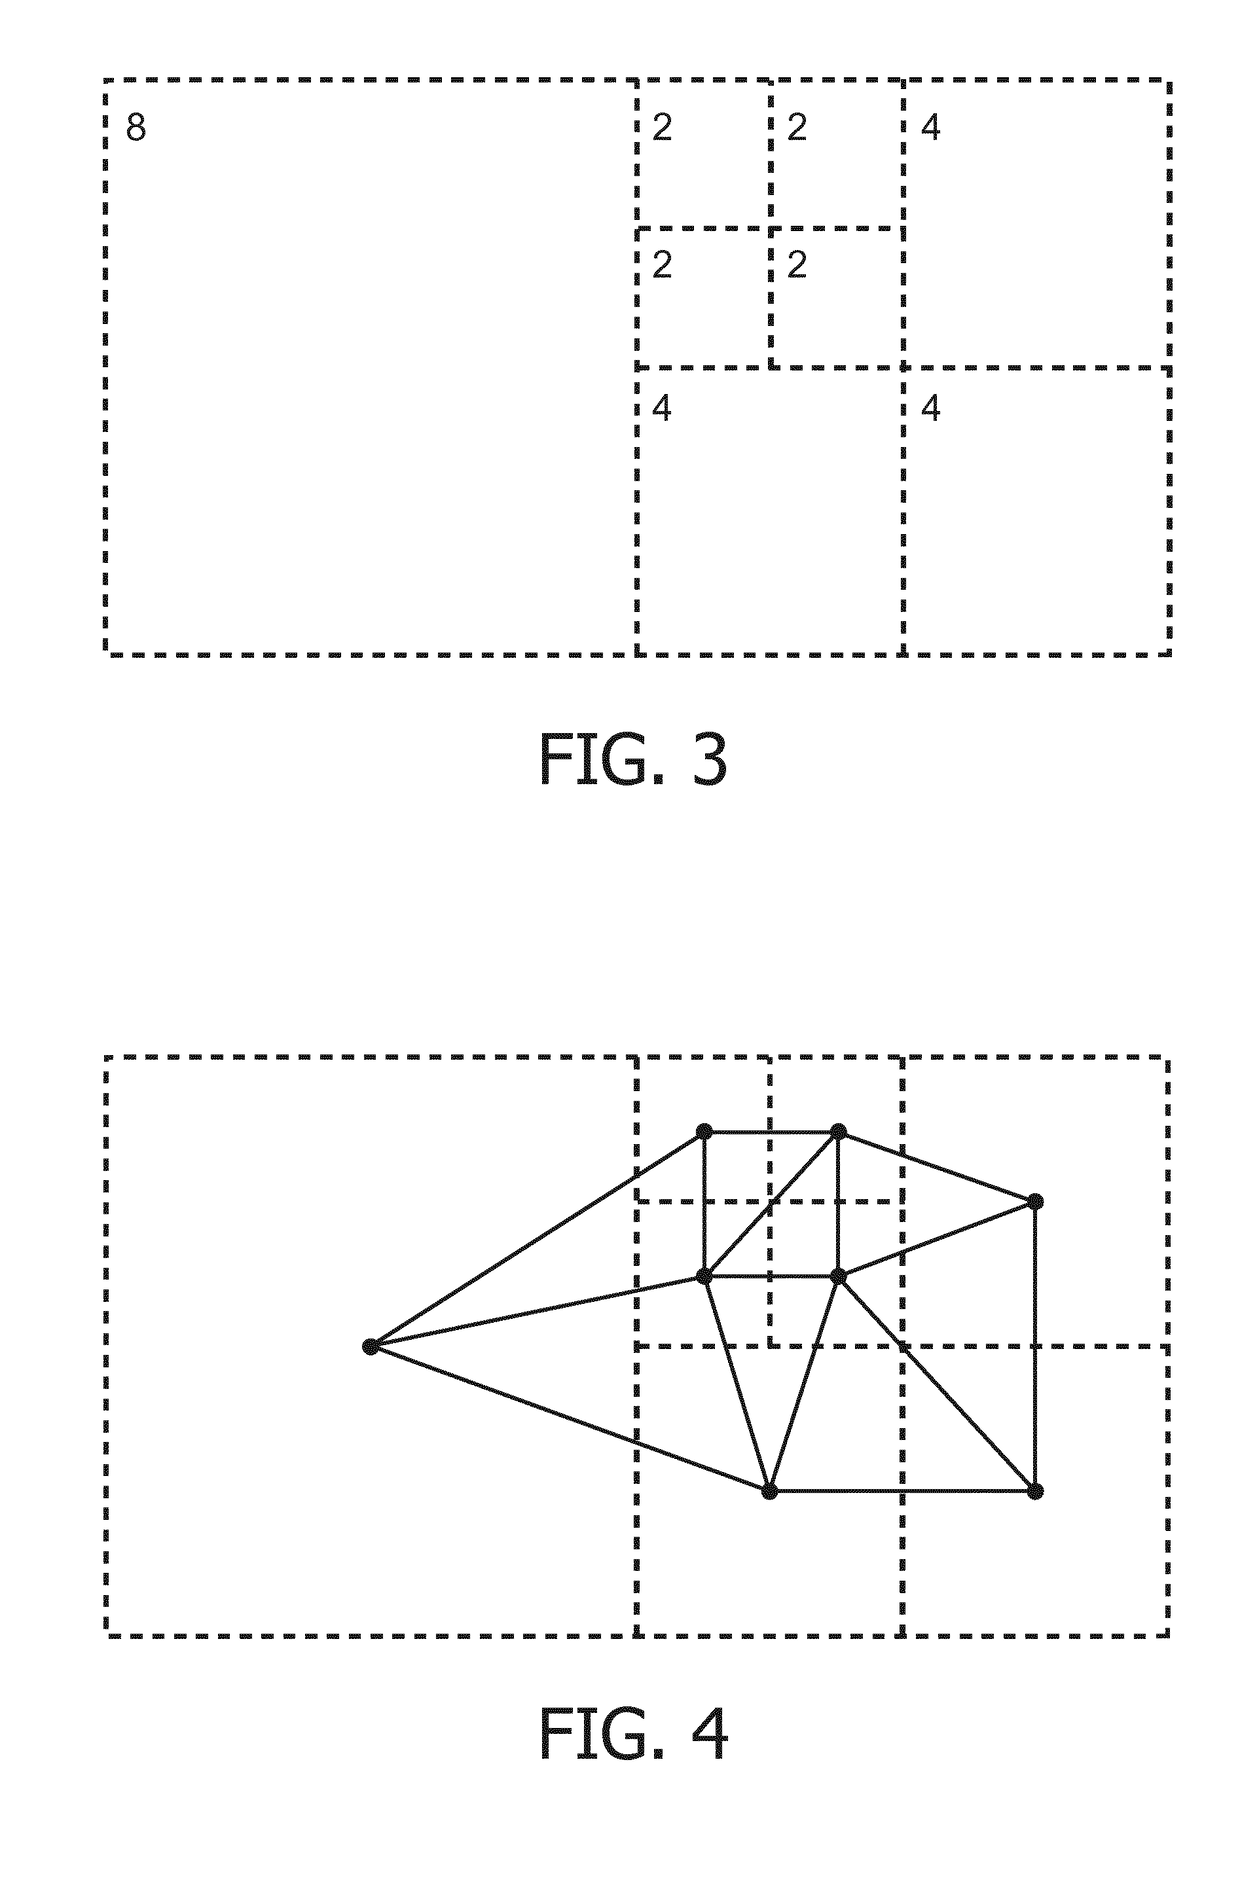 Generation of triangle mesh for a three dimensional image